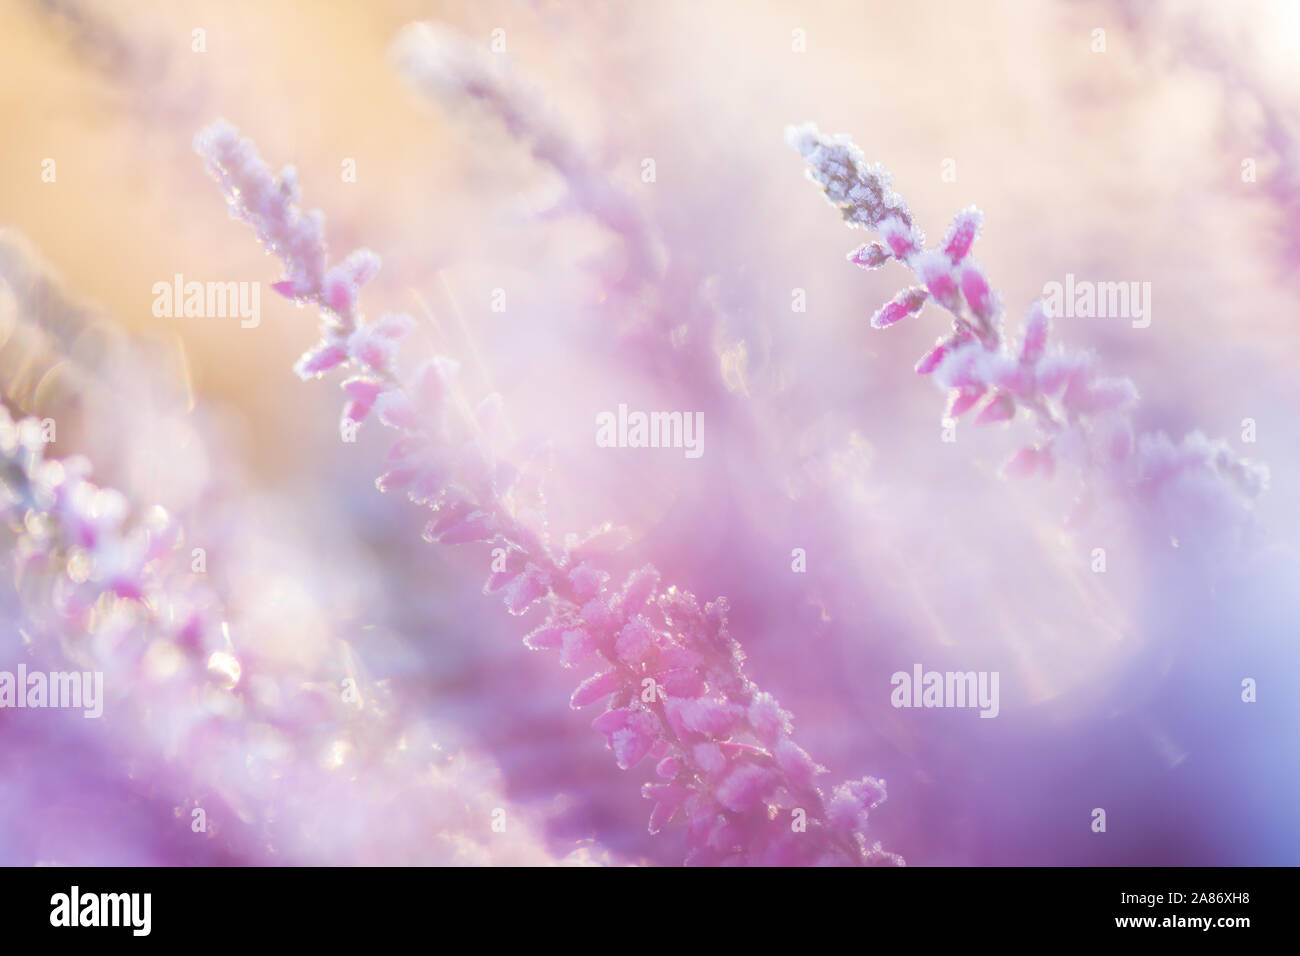 Common heather, Calluna vulgaris, flowers covered with ice crystals Stock Photo